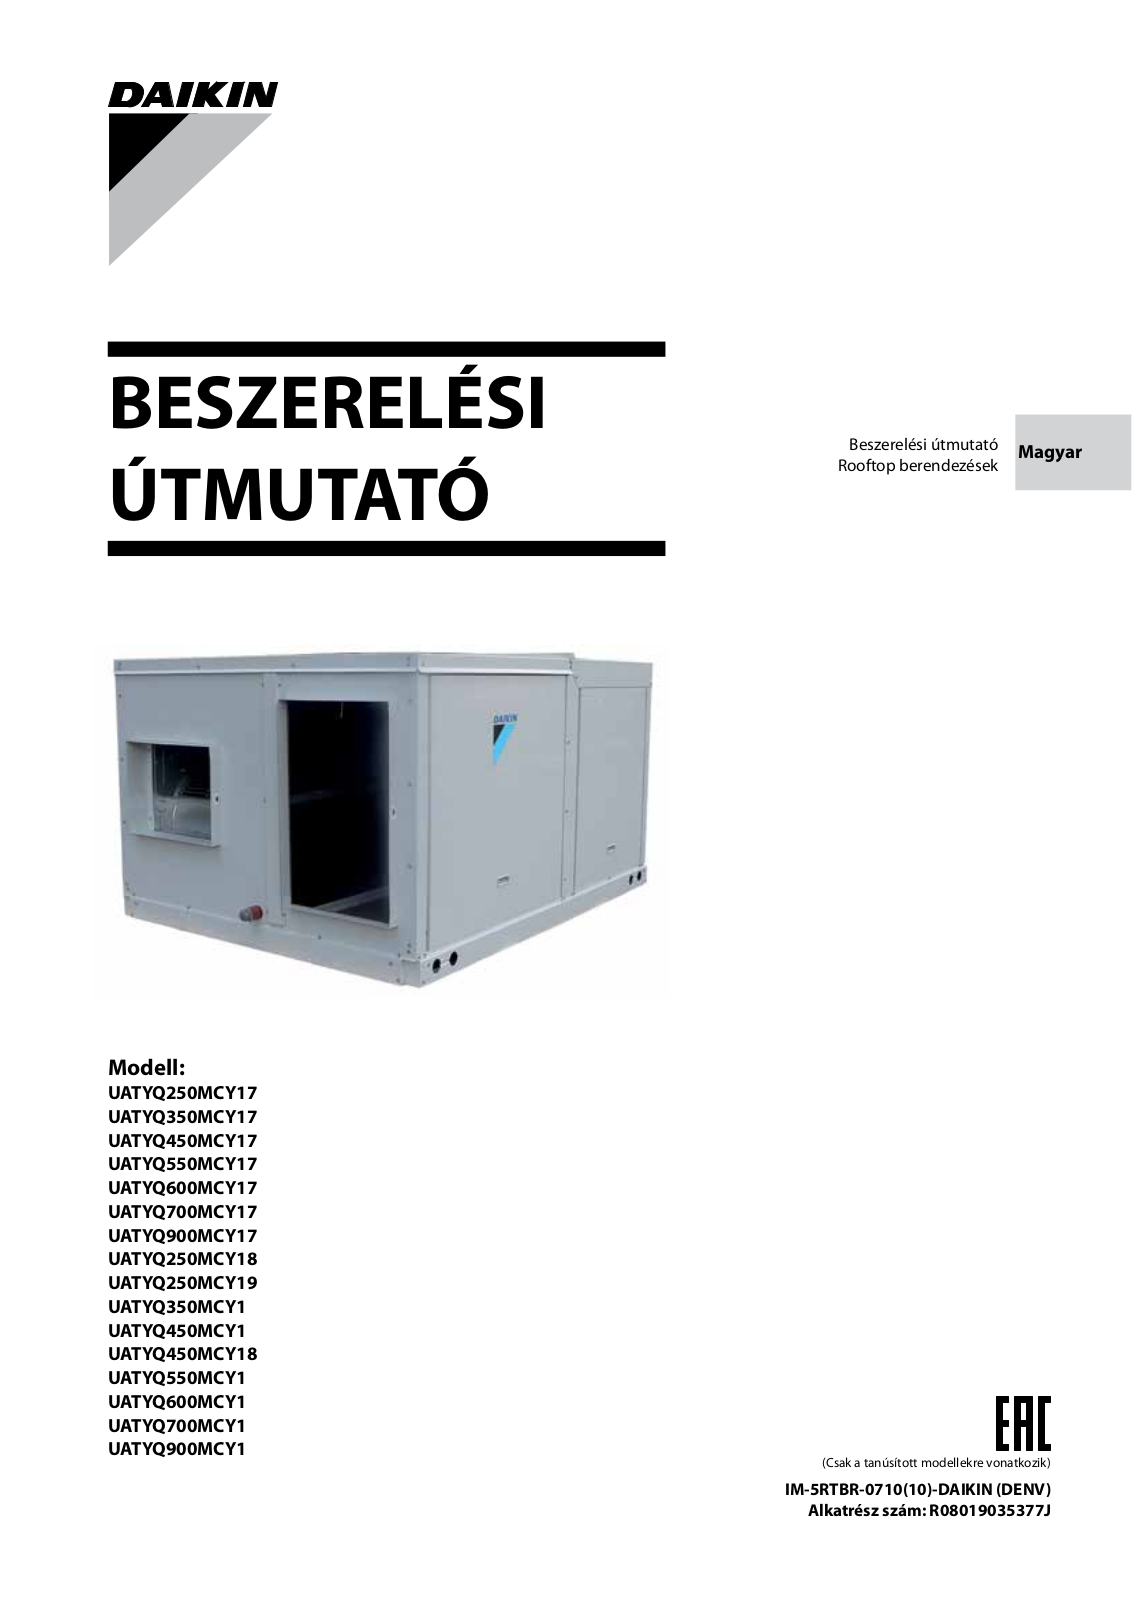 Daikin UATYQ250MCY17, UATYQ350MCY17, UATYQ450MCY17, UATYQ550MCY17, UATYQ600MCY17 Installation manuals